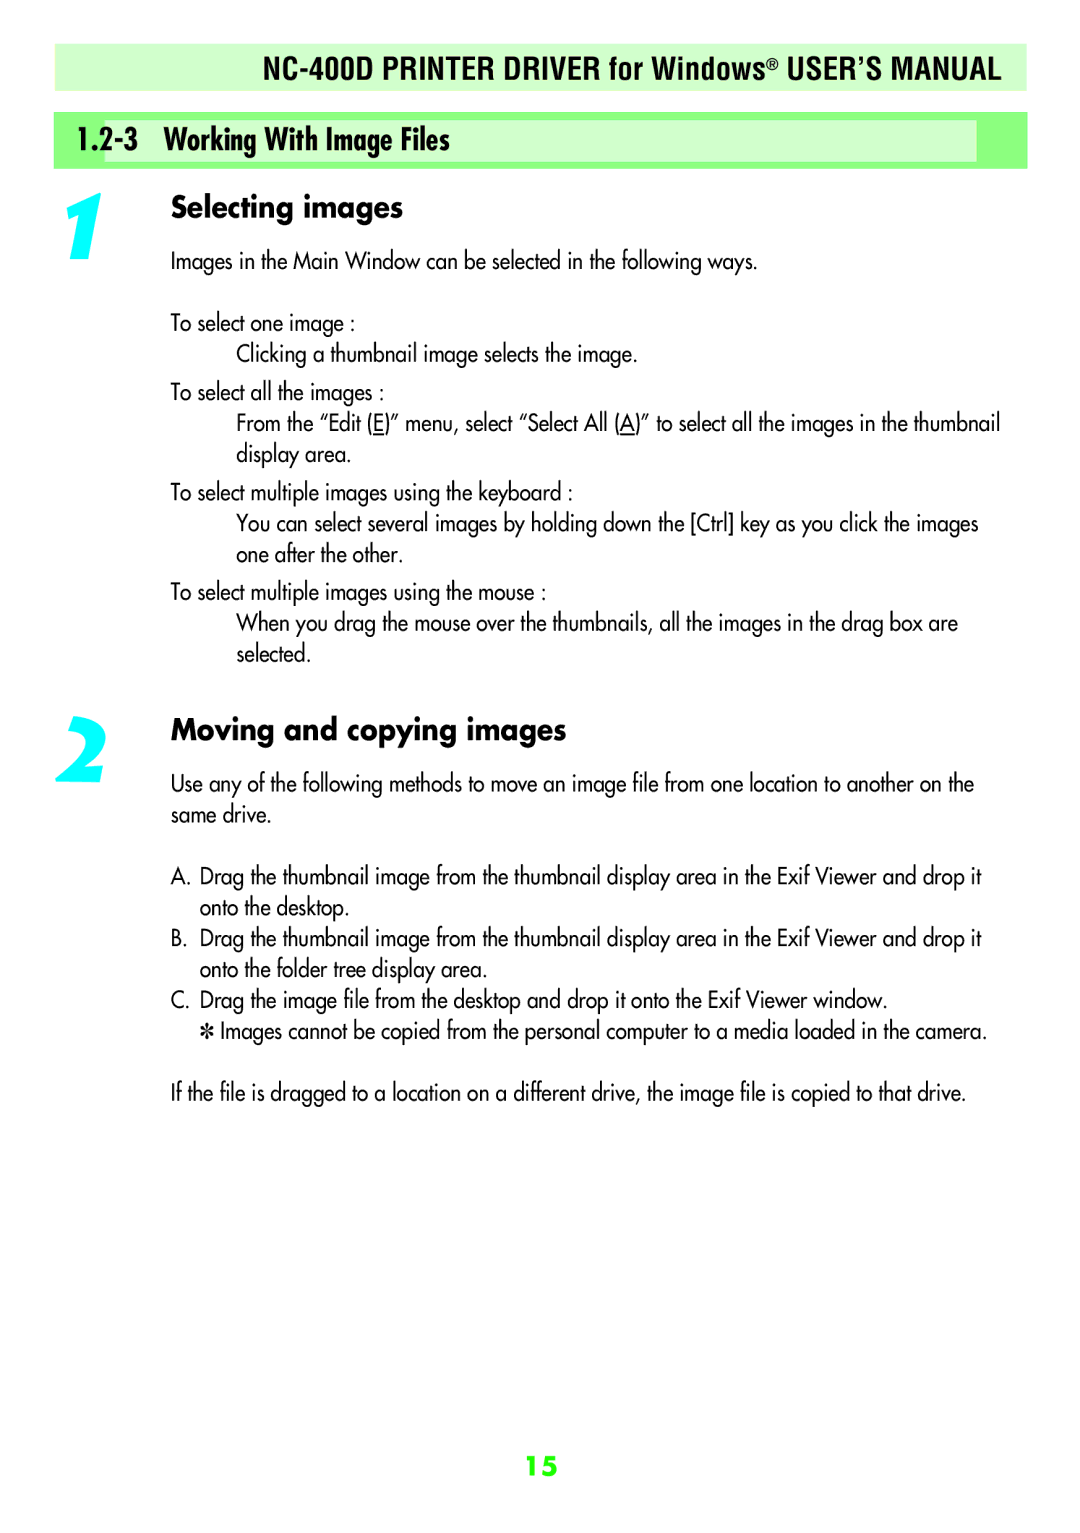 FujiFilm NC-400D user manual Selecting images, Moving and copying images 